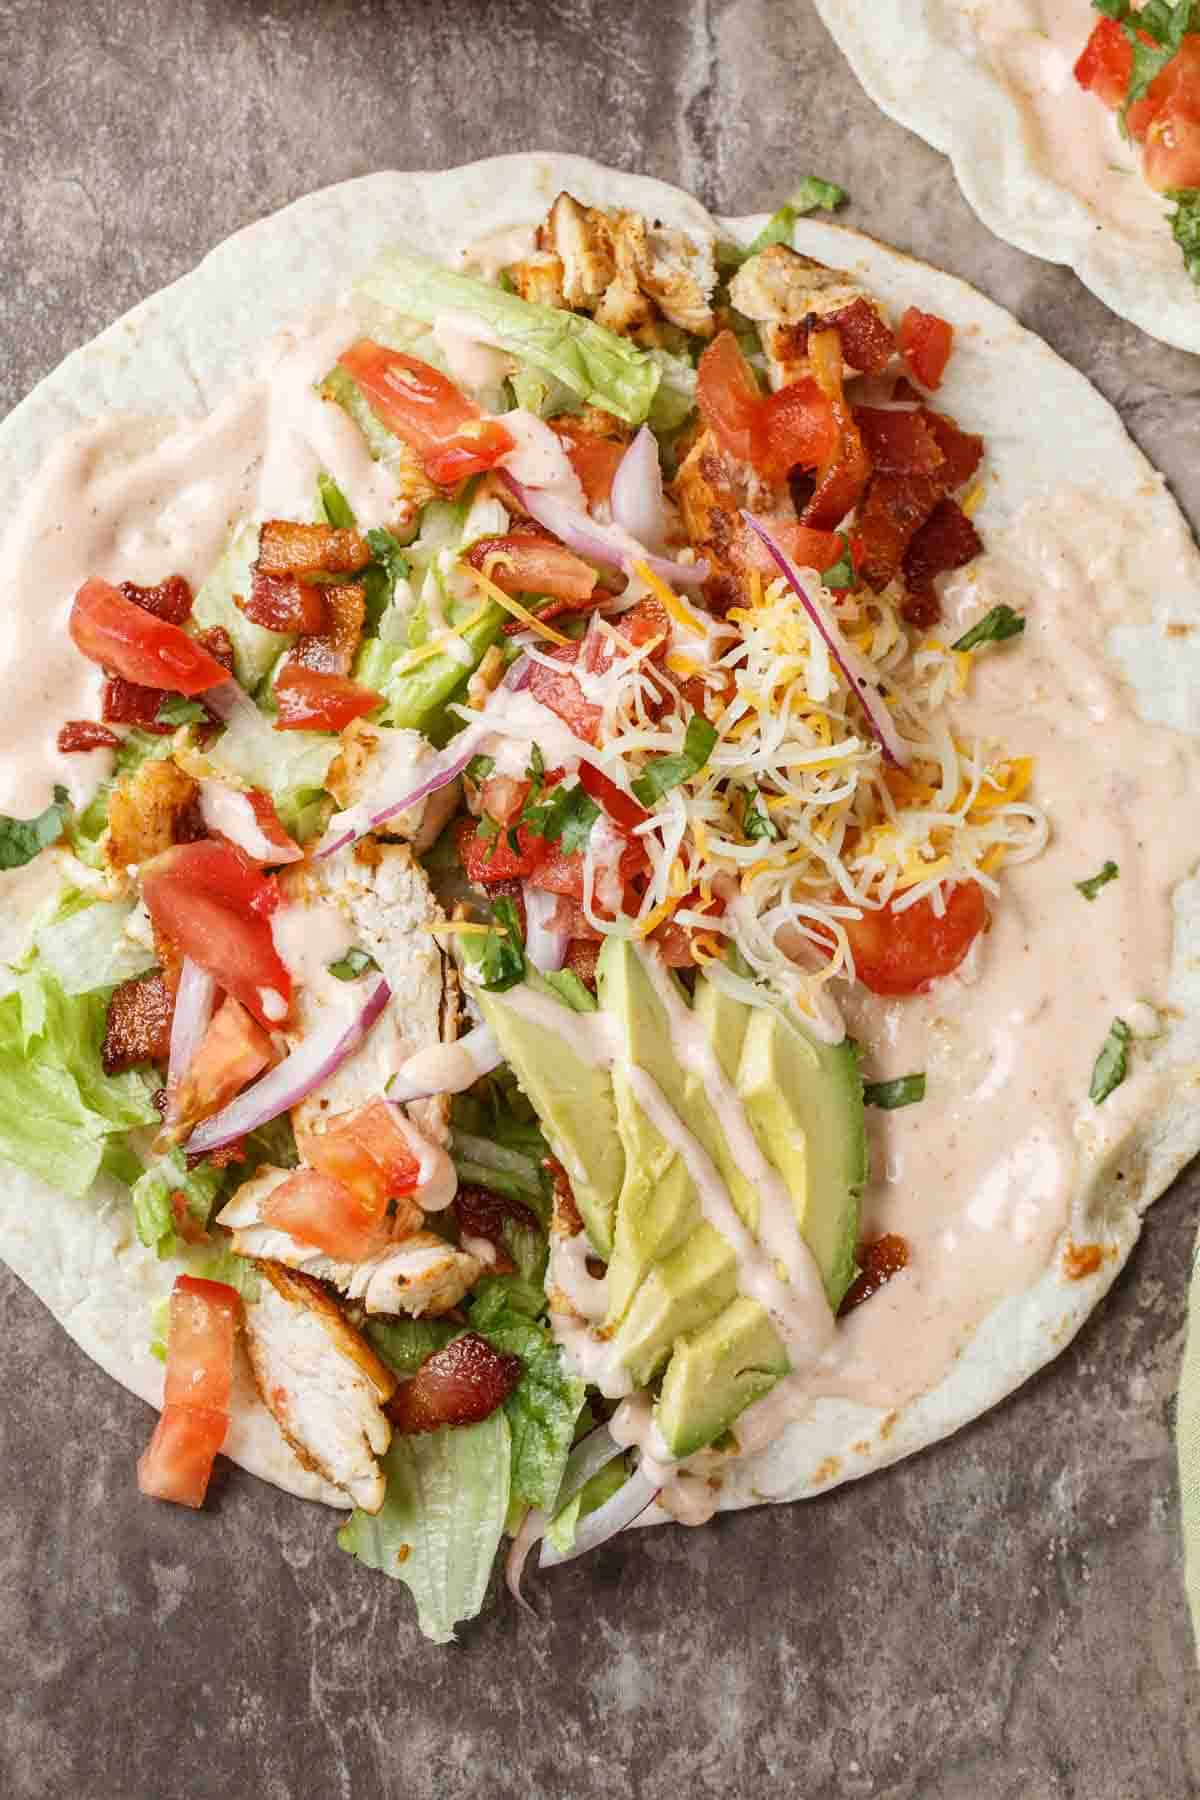 Upclose picture of a buffalo chicken wrapa, spicy buffalo ranch with chicken, cheese, lettuce and more toppings.